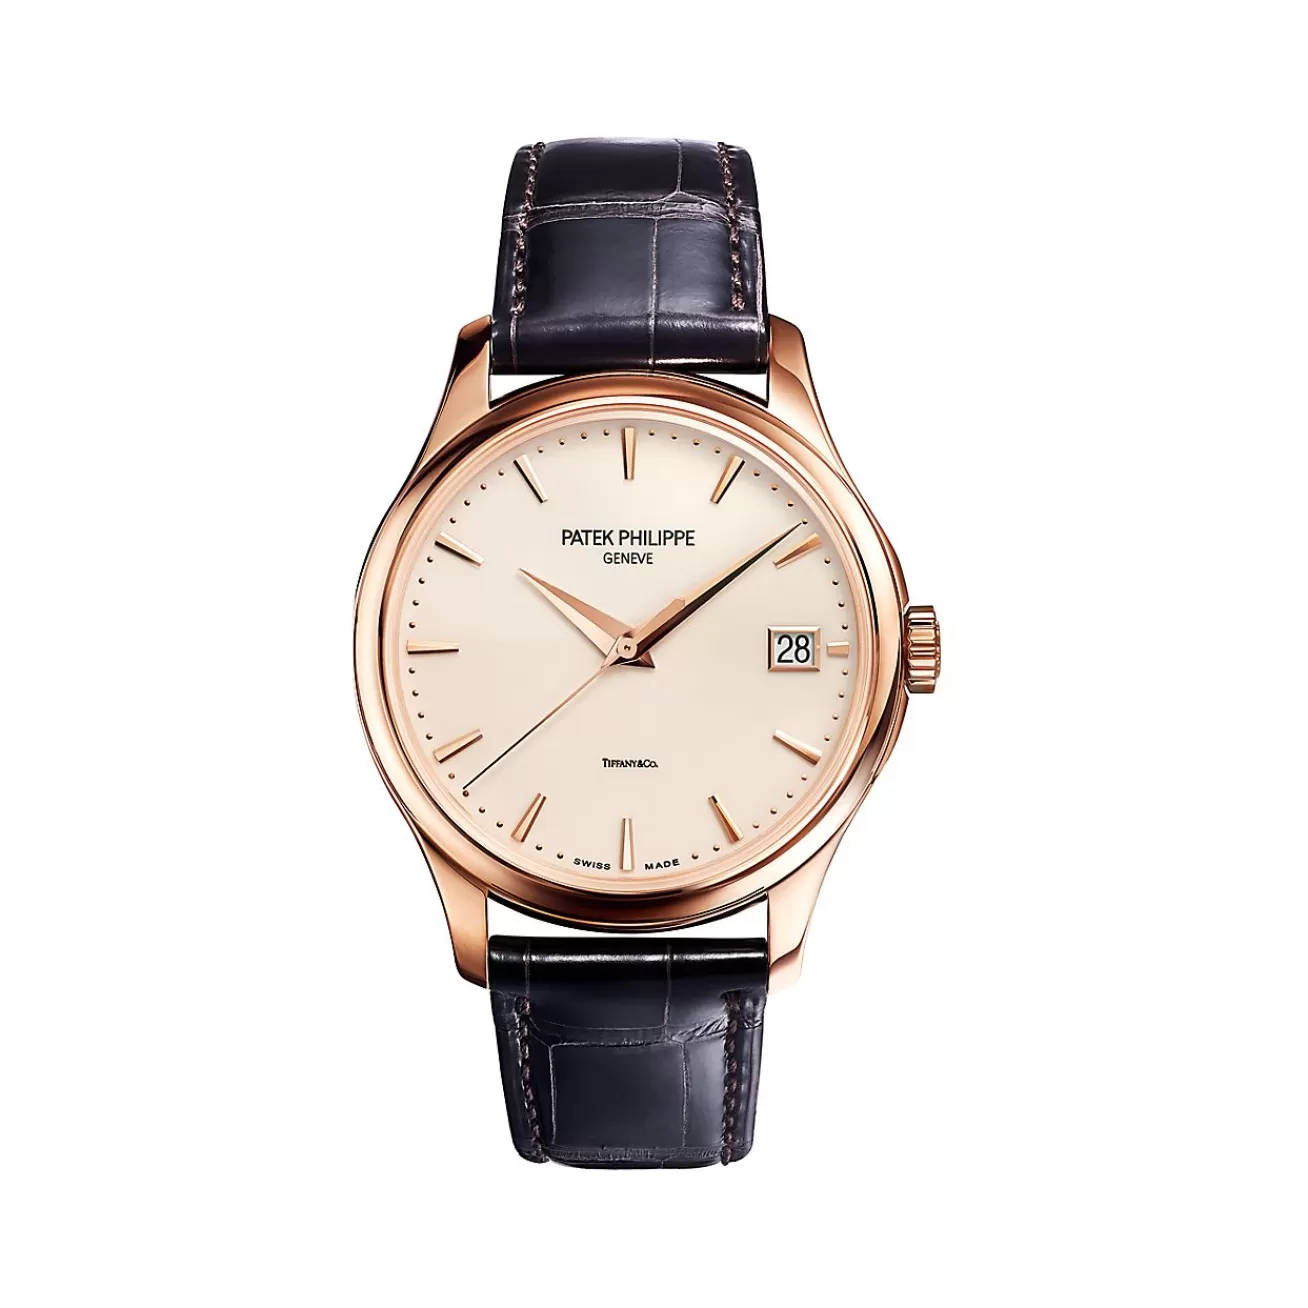 Tiffany & Co. Patek Philippe Calatrava men's watch in 18k rose gold with a leather strap. | ^ Patek Philippe